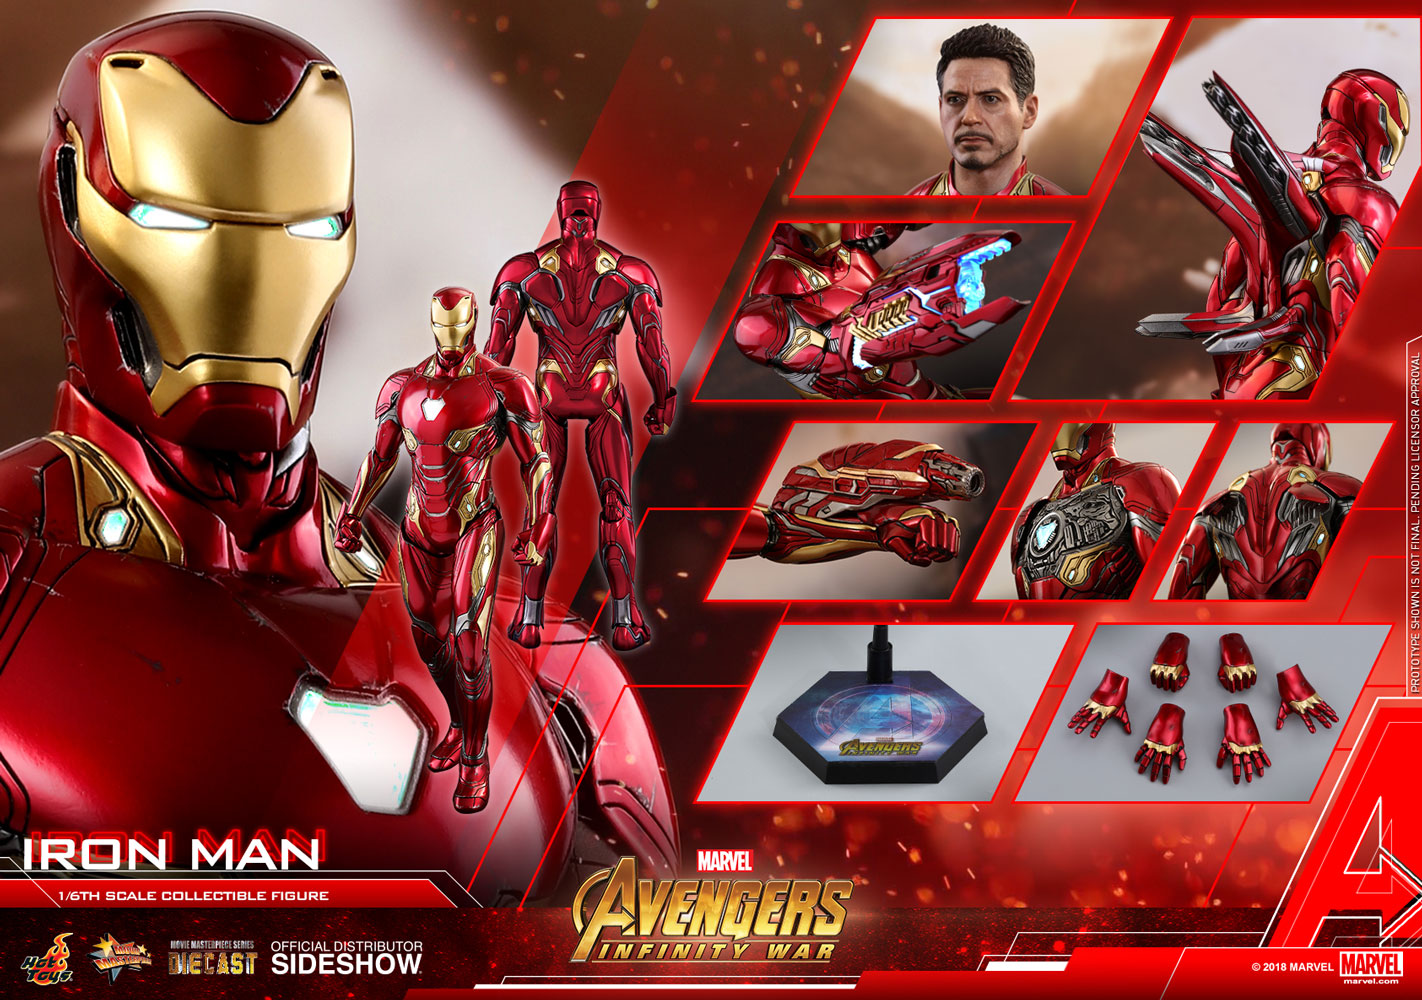 Single Avengers Infinity War Iron Man Heroes Building Blocks Toys Gifts New 2019 